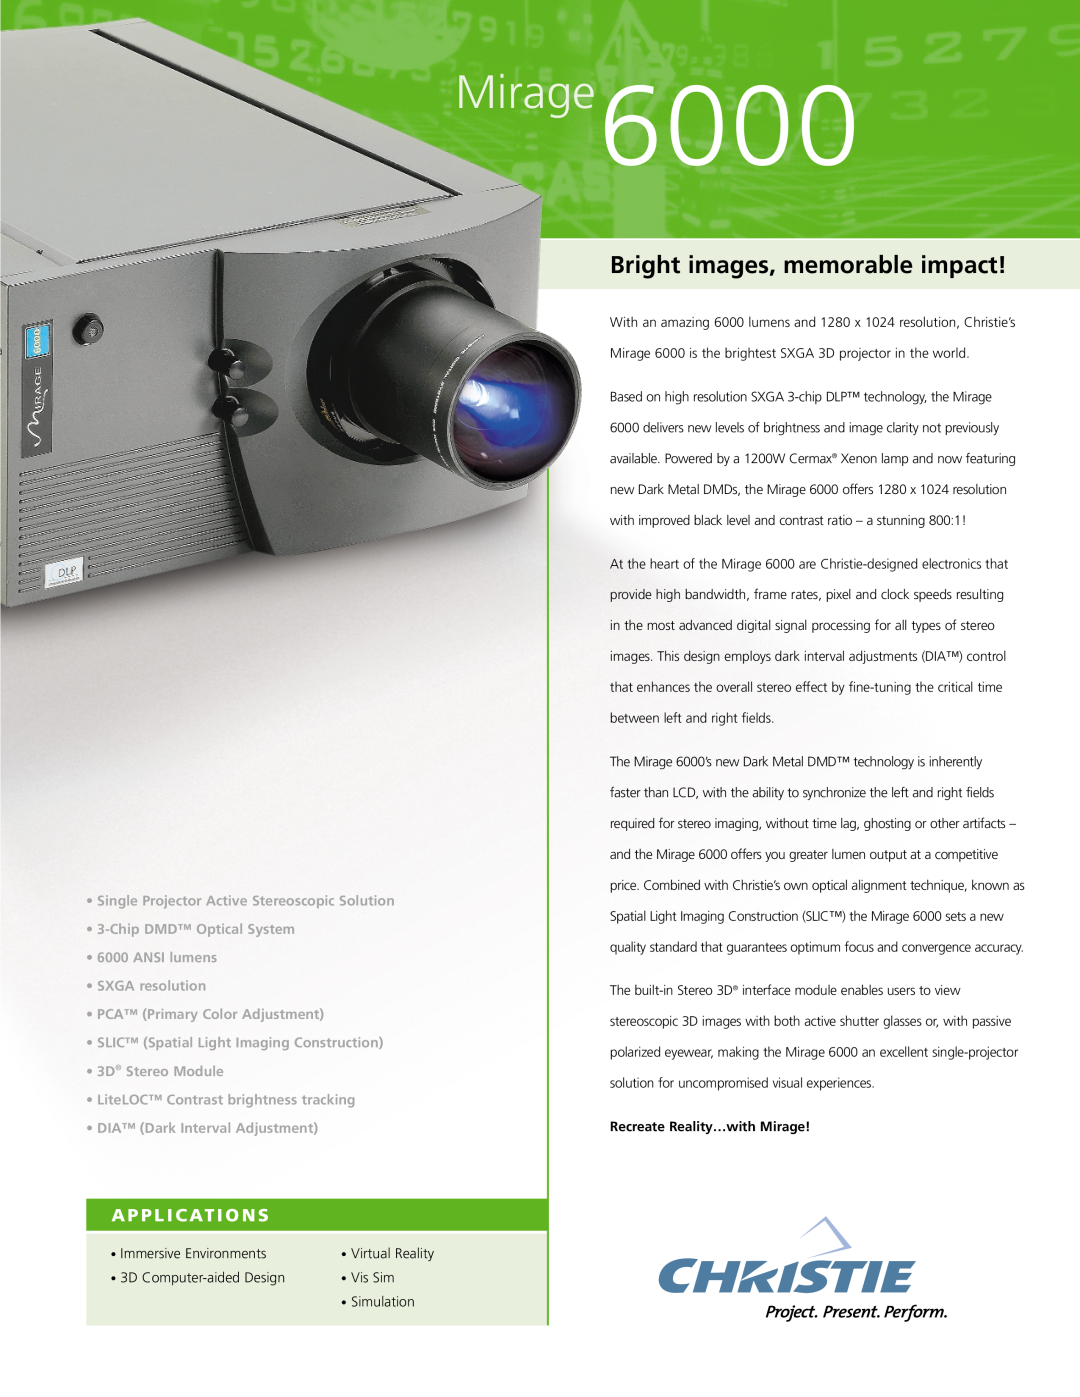 Christie Digital Systems manual A P P L I C At I O N S, Mirage6000, Bright images, memorable impact, Vis Sim 